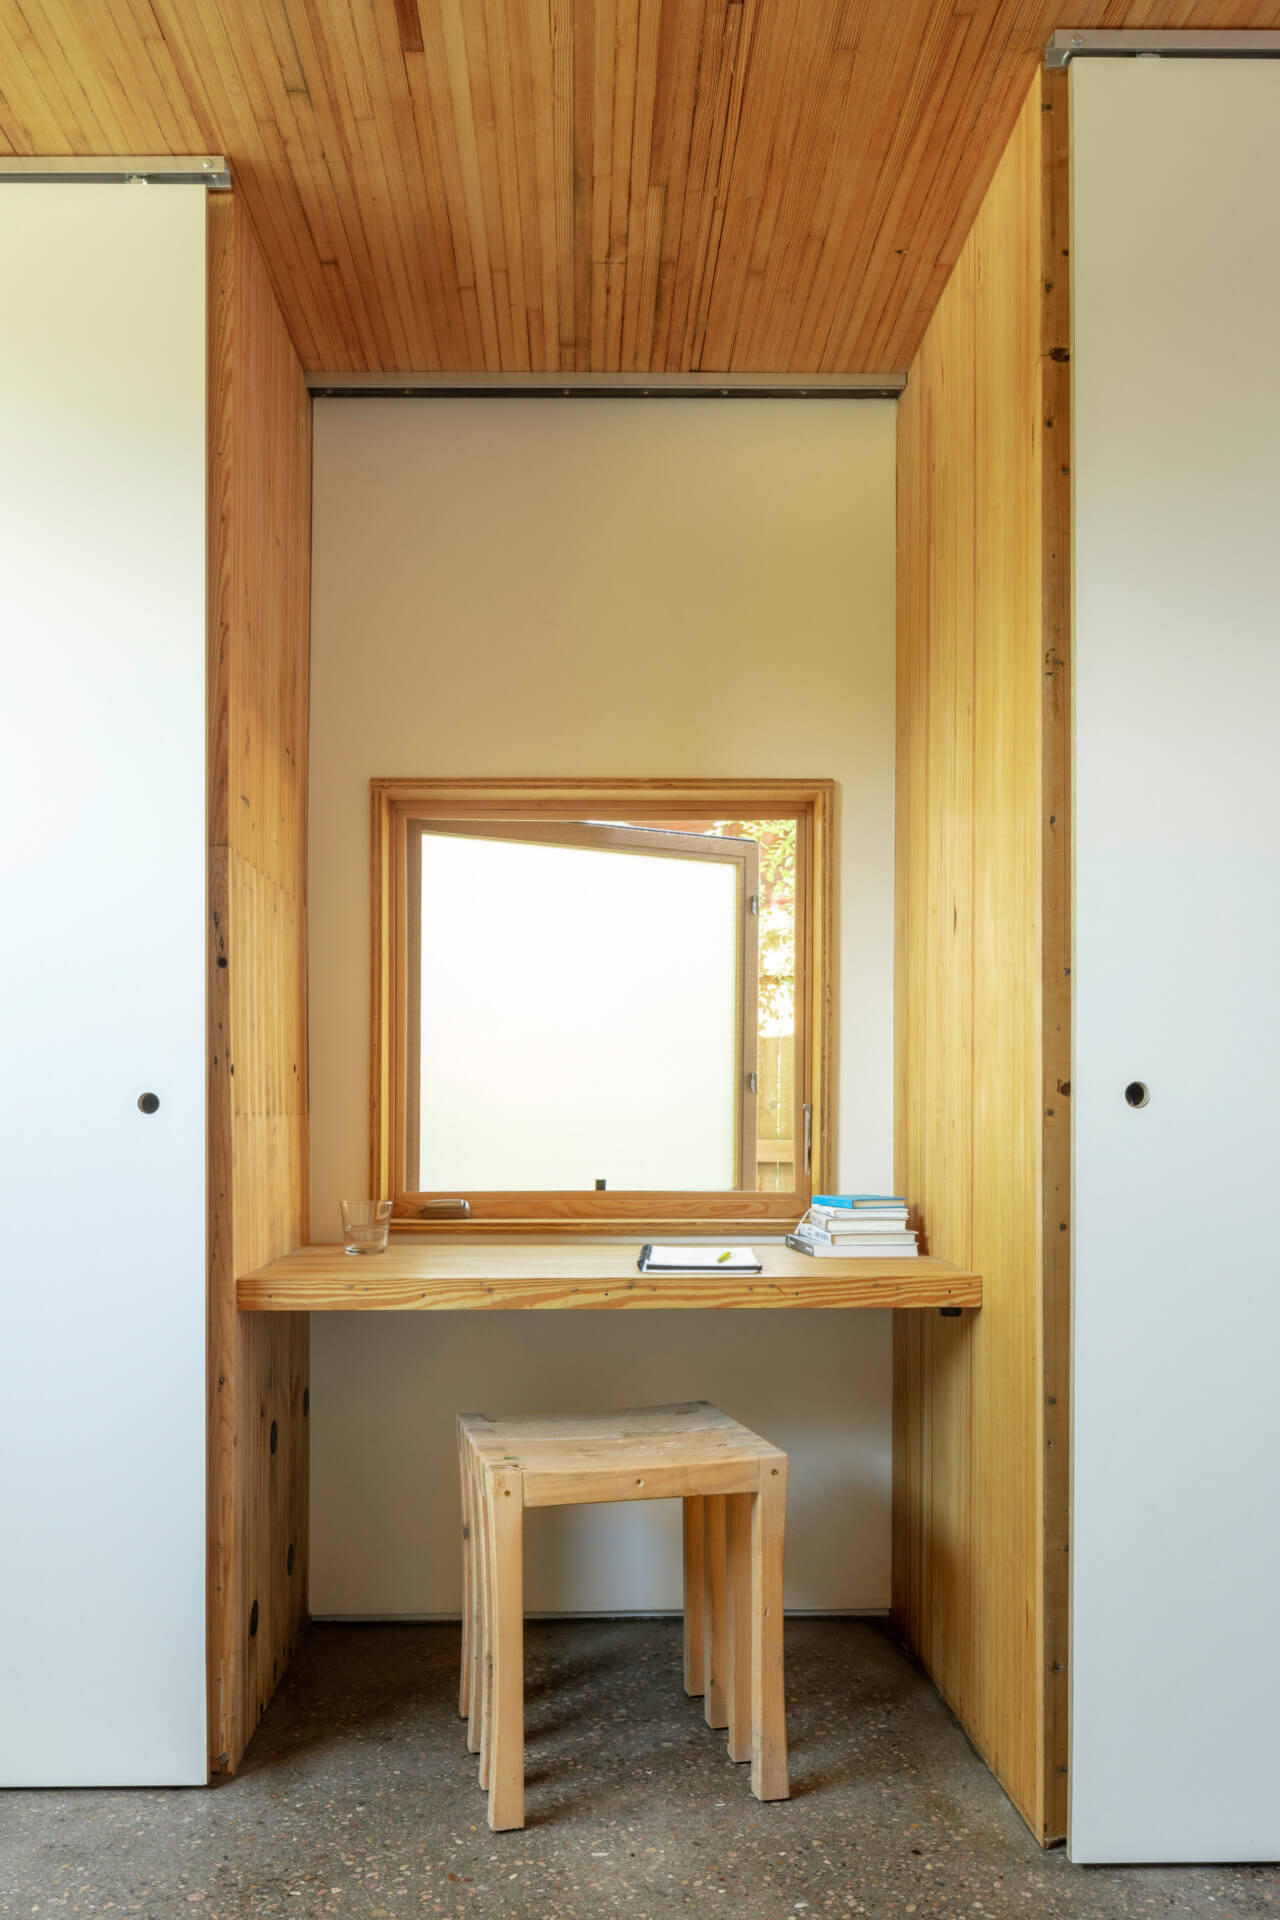 An office nook framed with wood